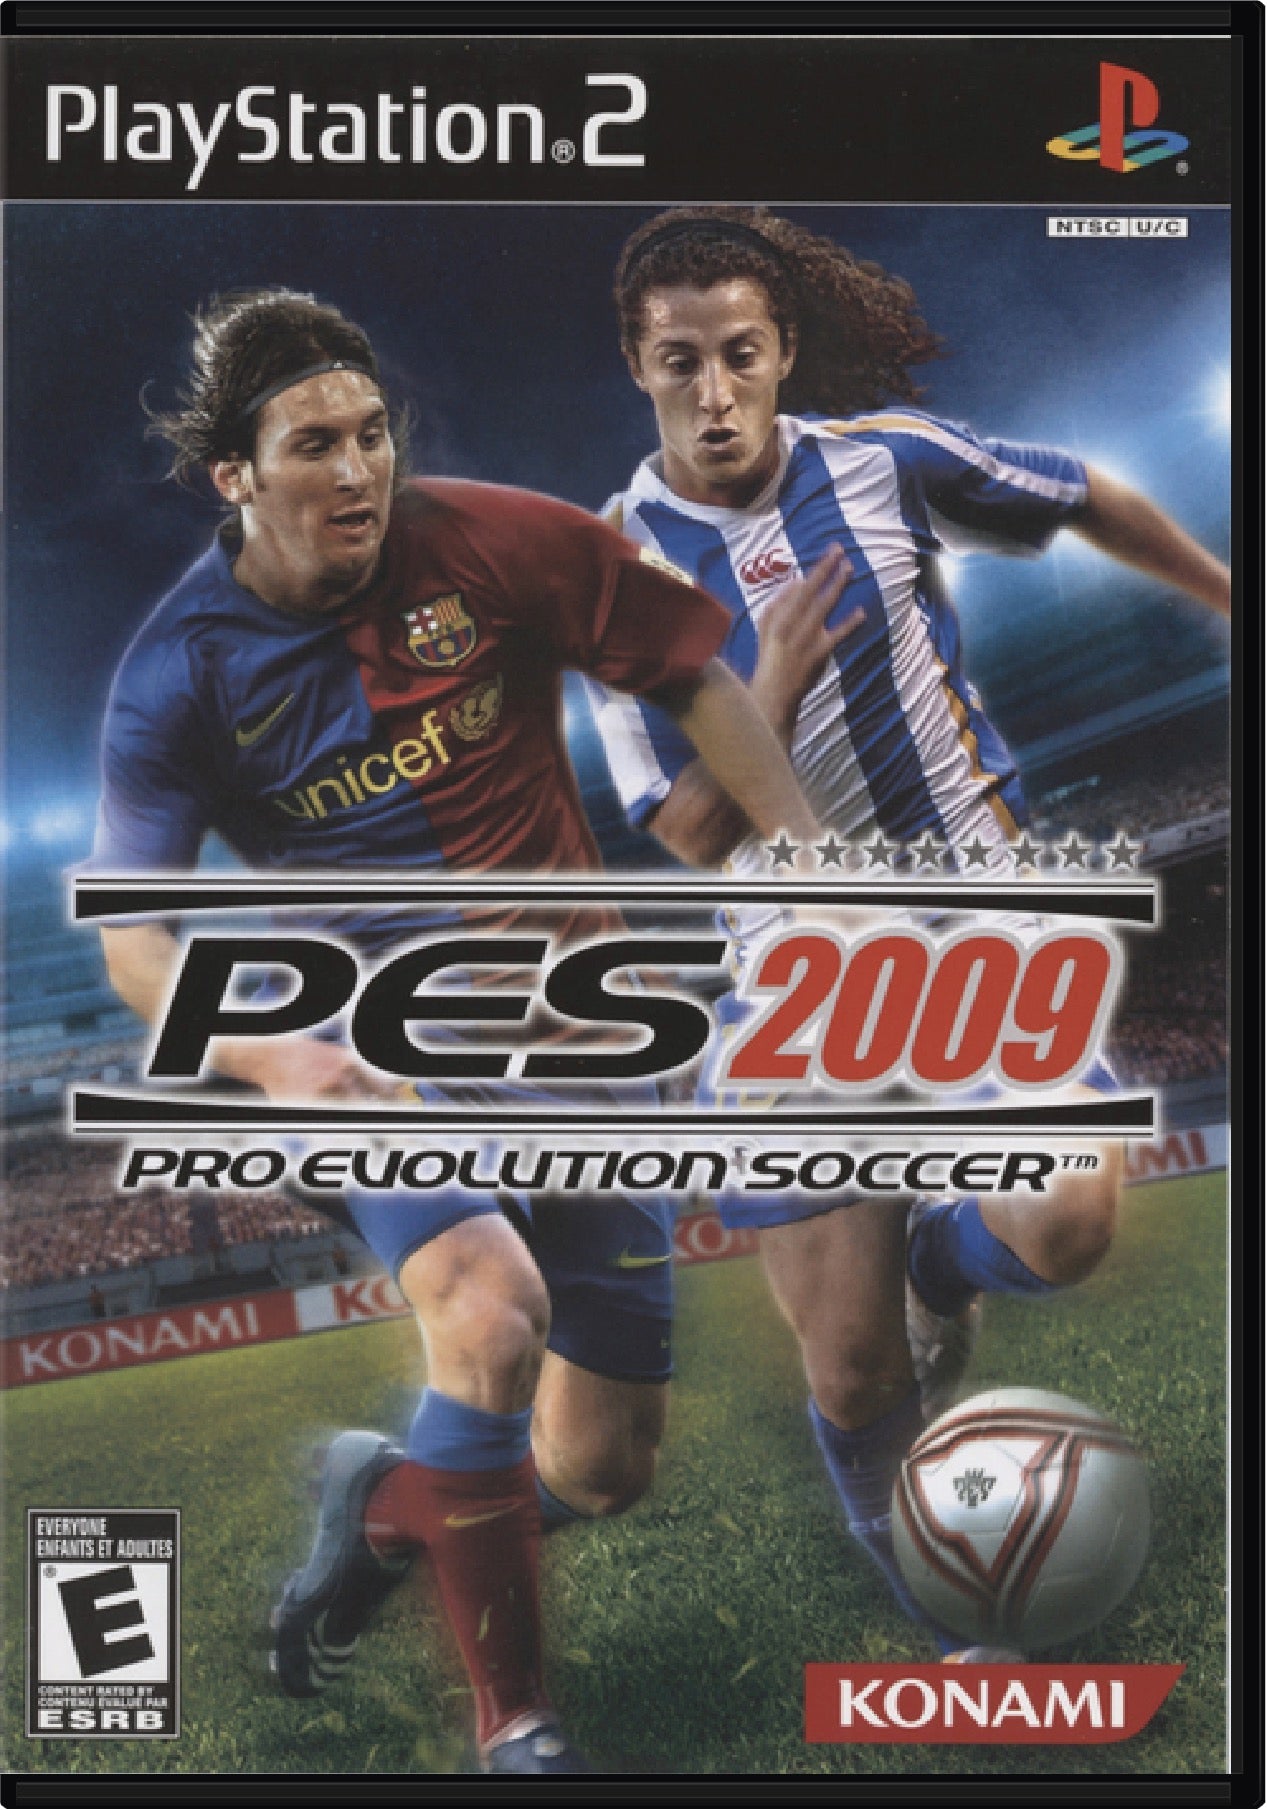 Pro Evolution Soccer 2009 Cover Art and Product Photo